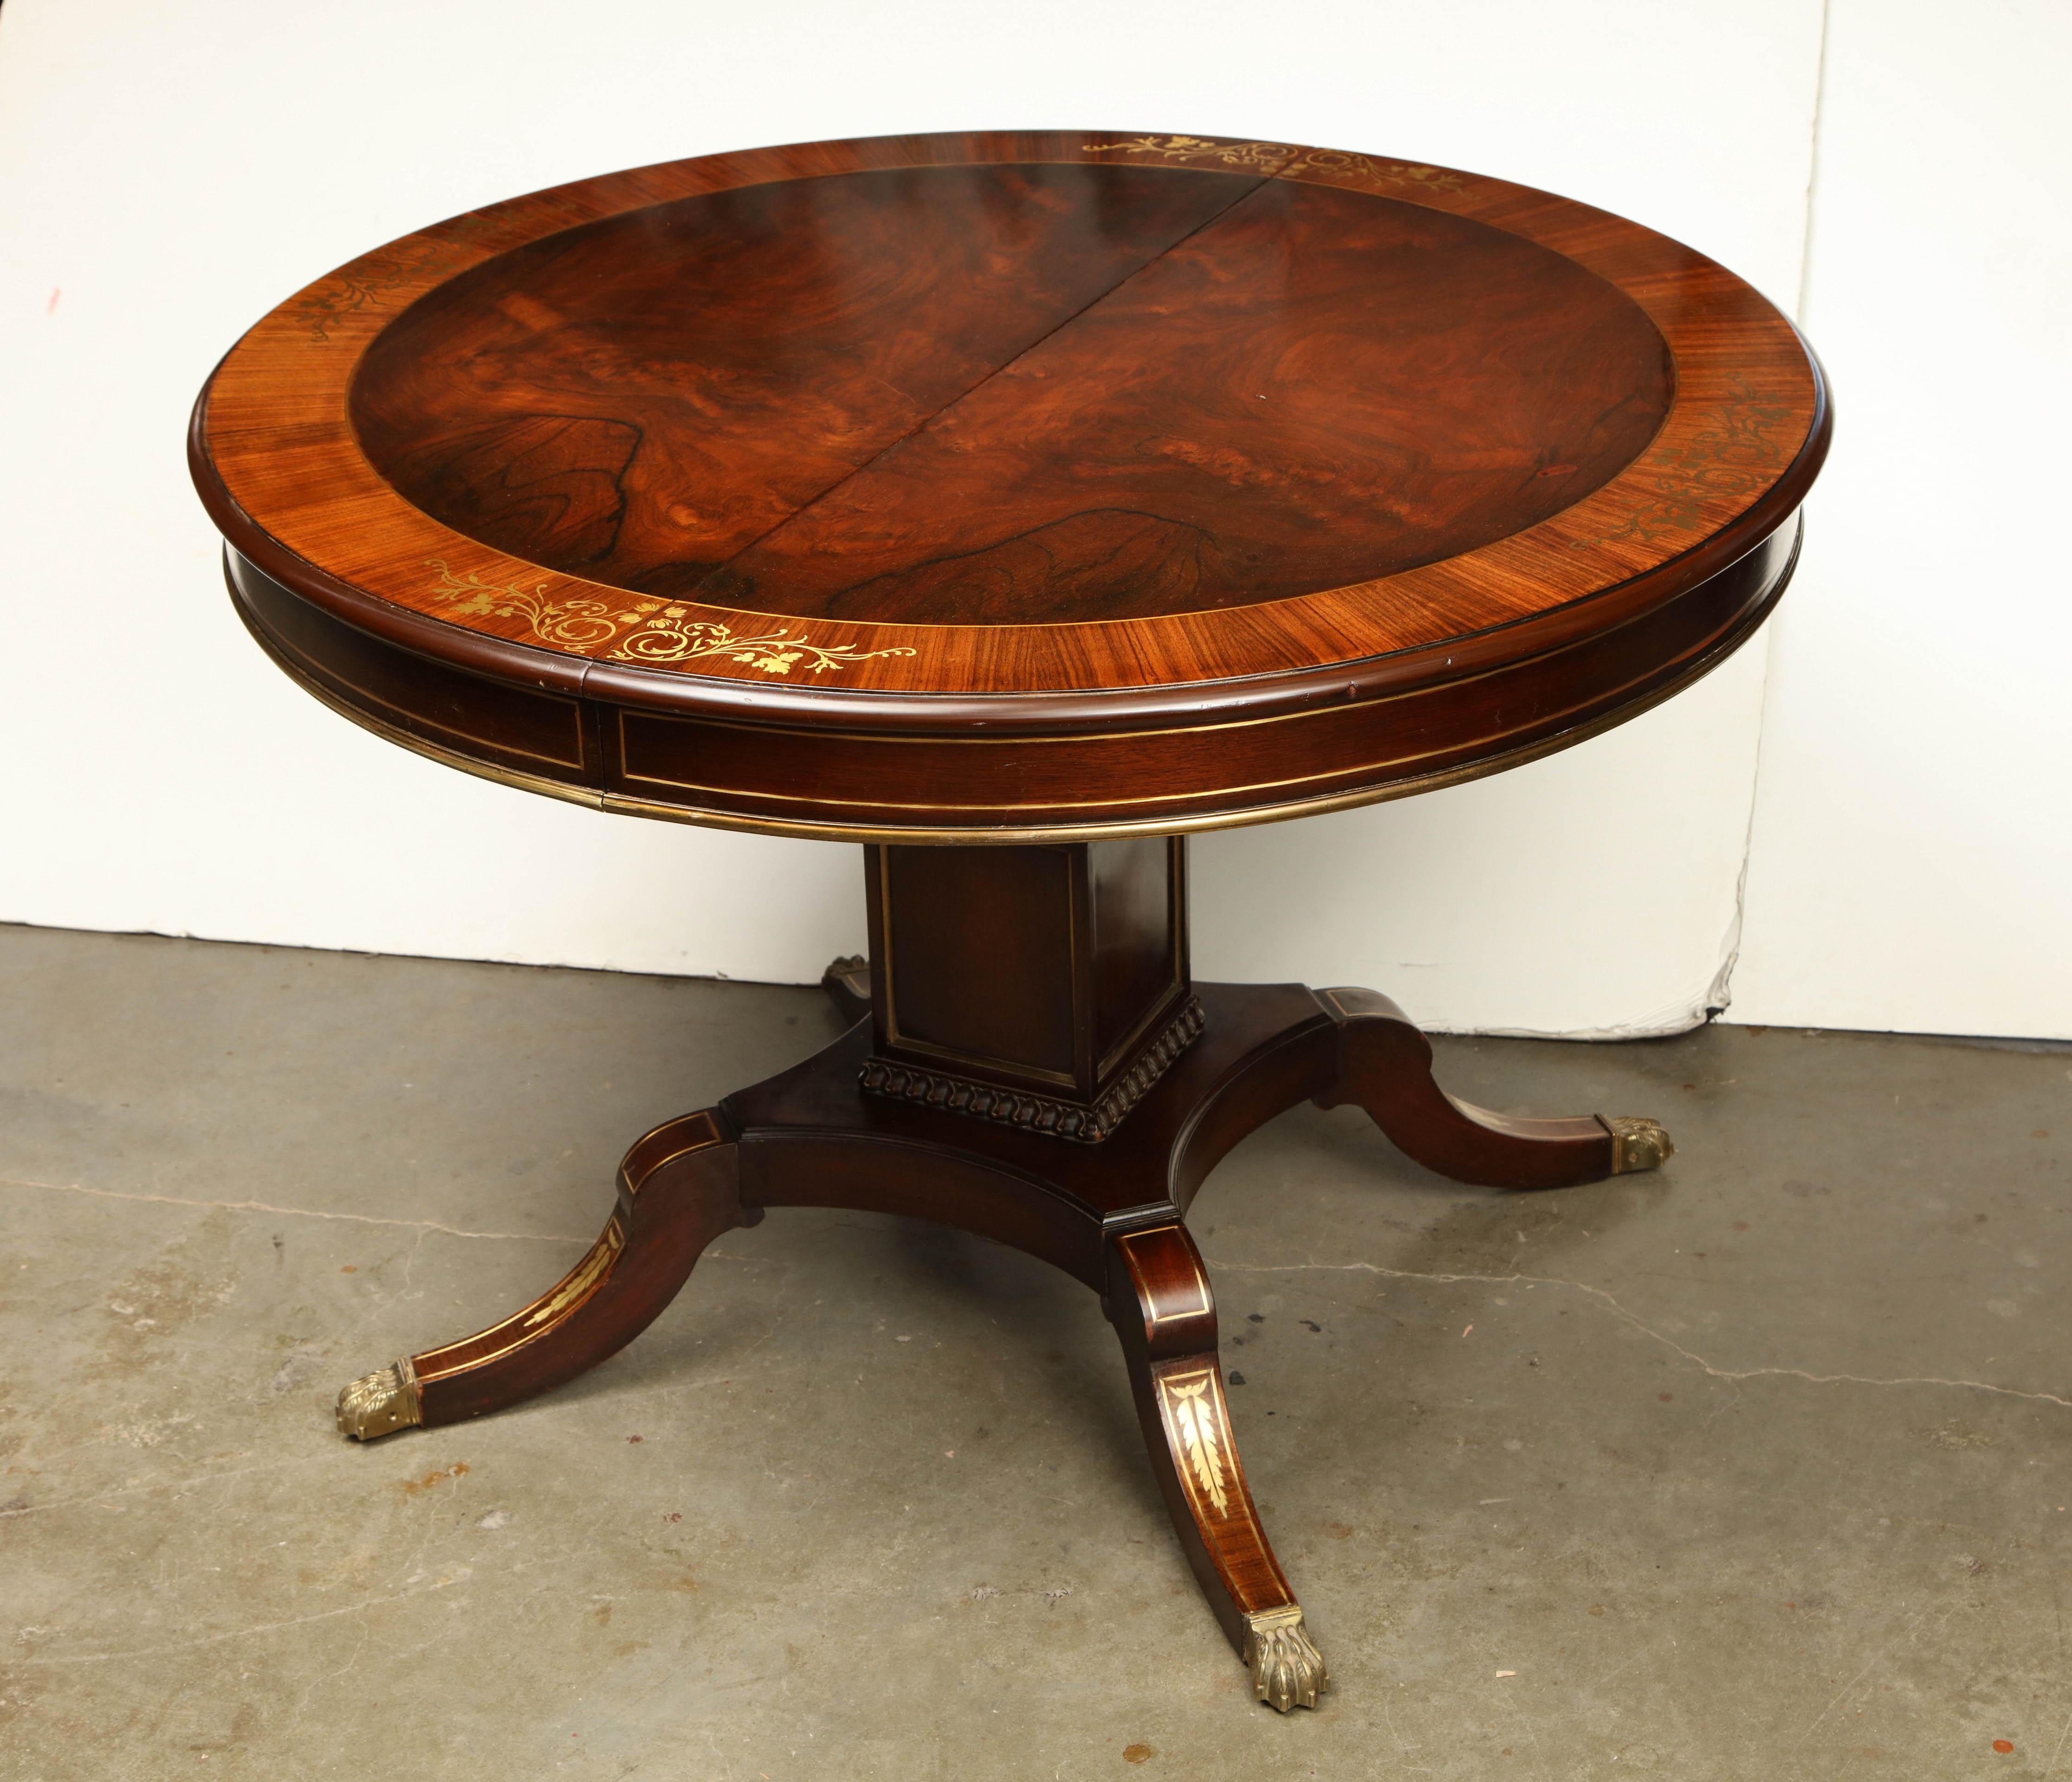 An English Regency style mahogany brass inlaid and cross banded extending dining table on a single pedestal base with four brass paw foot legs.
Measures: With one 12